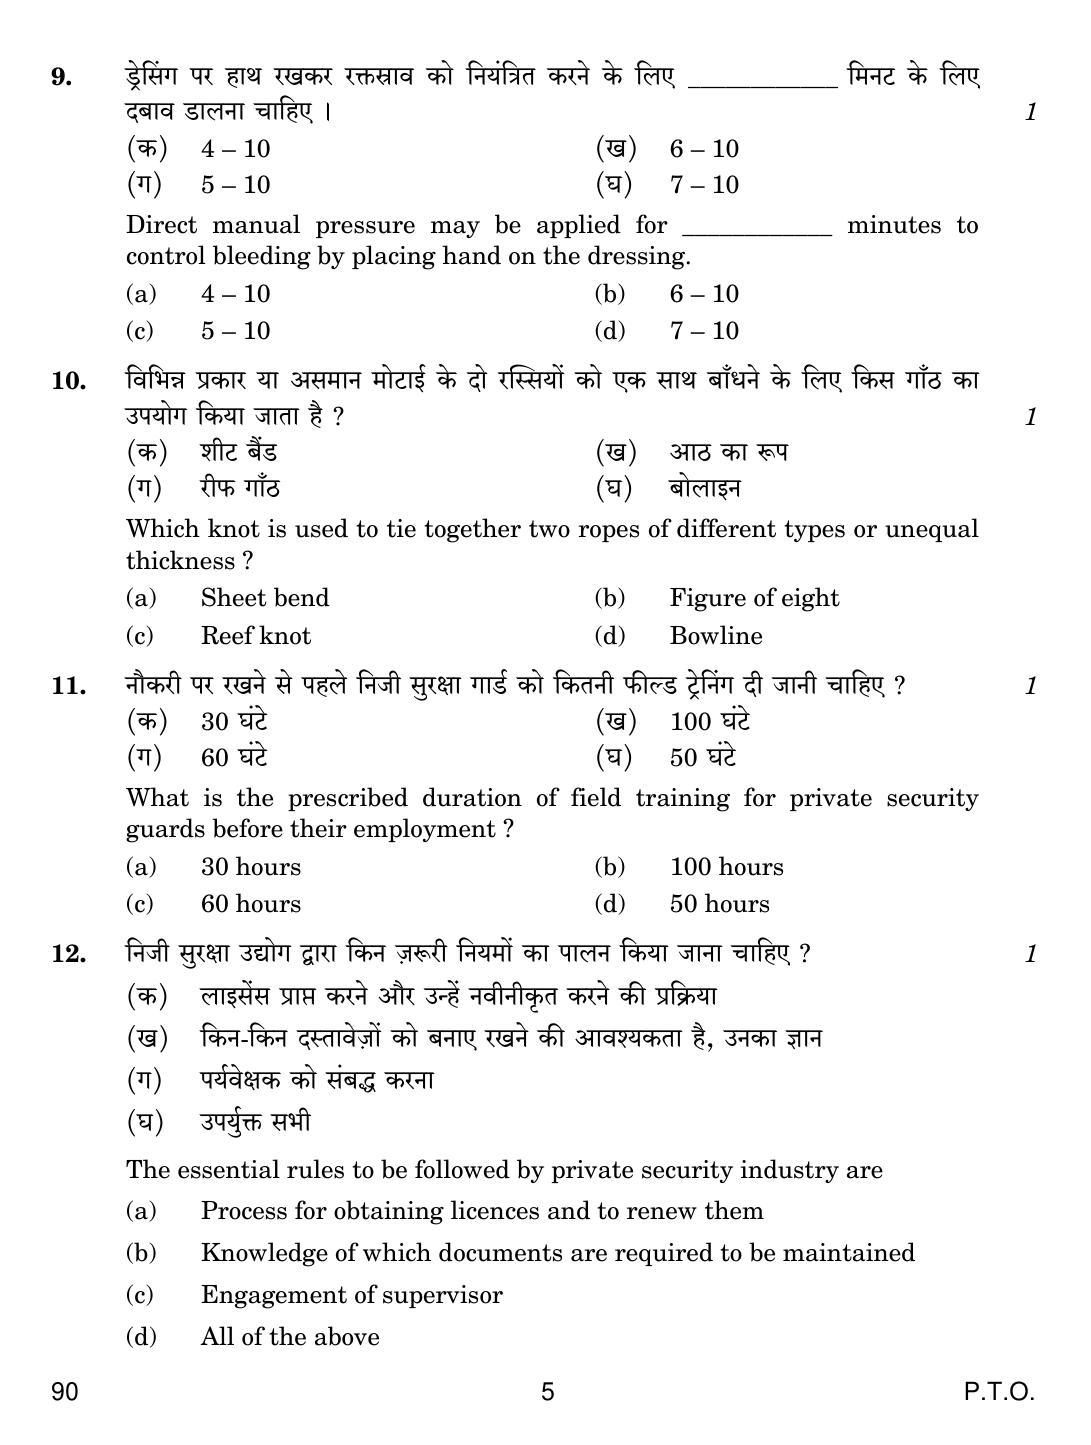 CBSE Class 10 90 SECURITY 2019 Question Paper - Page 5